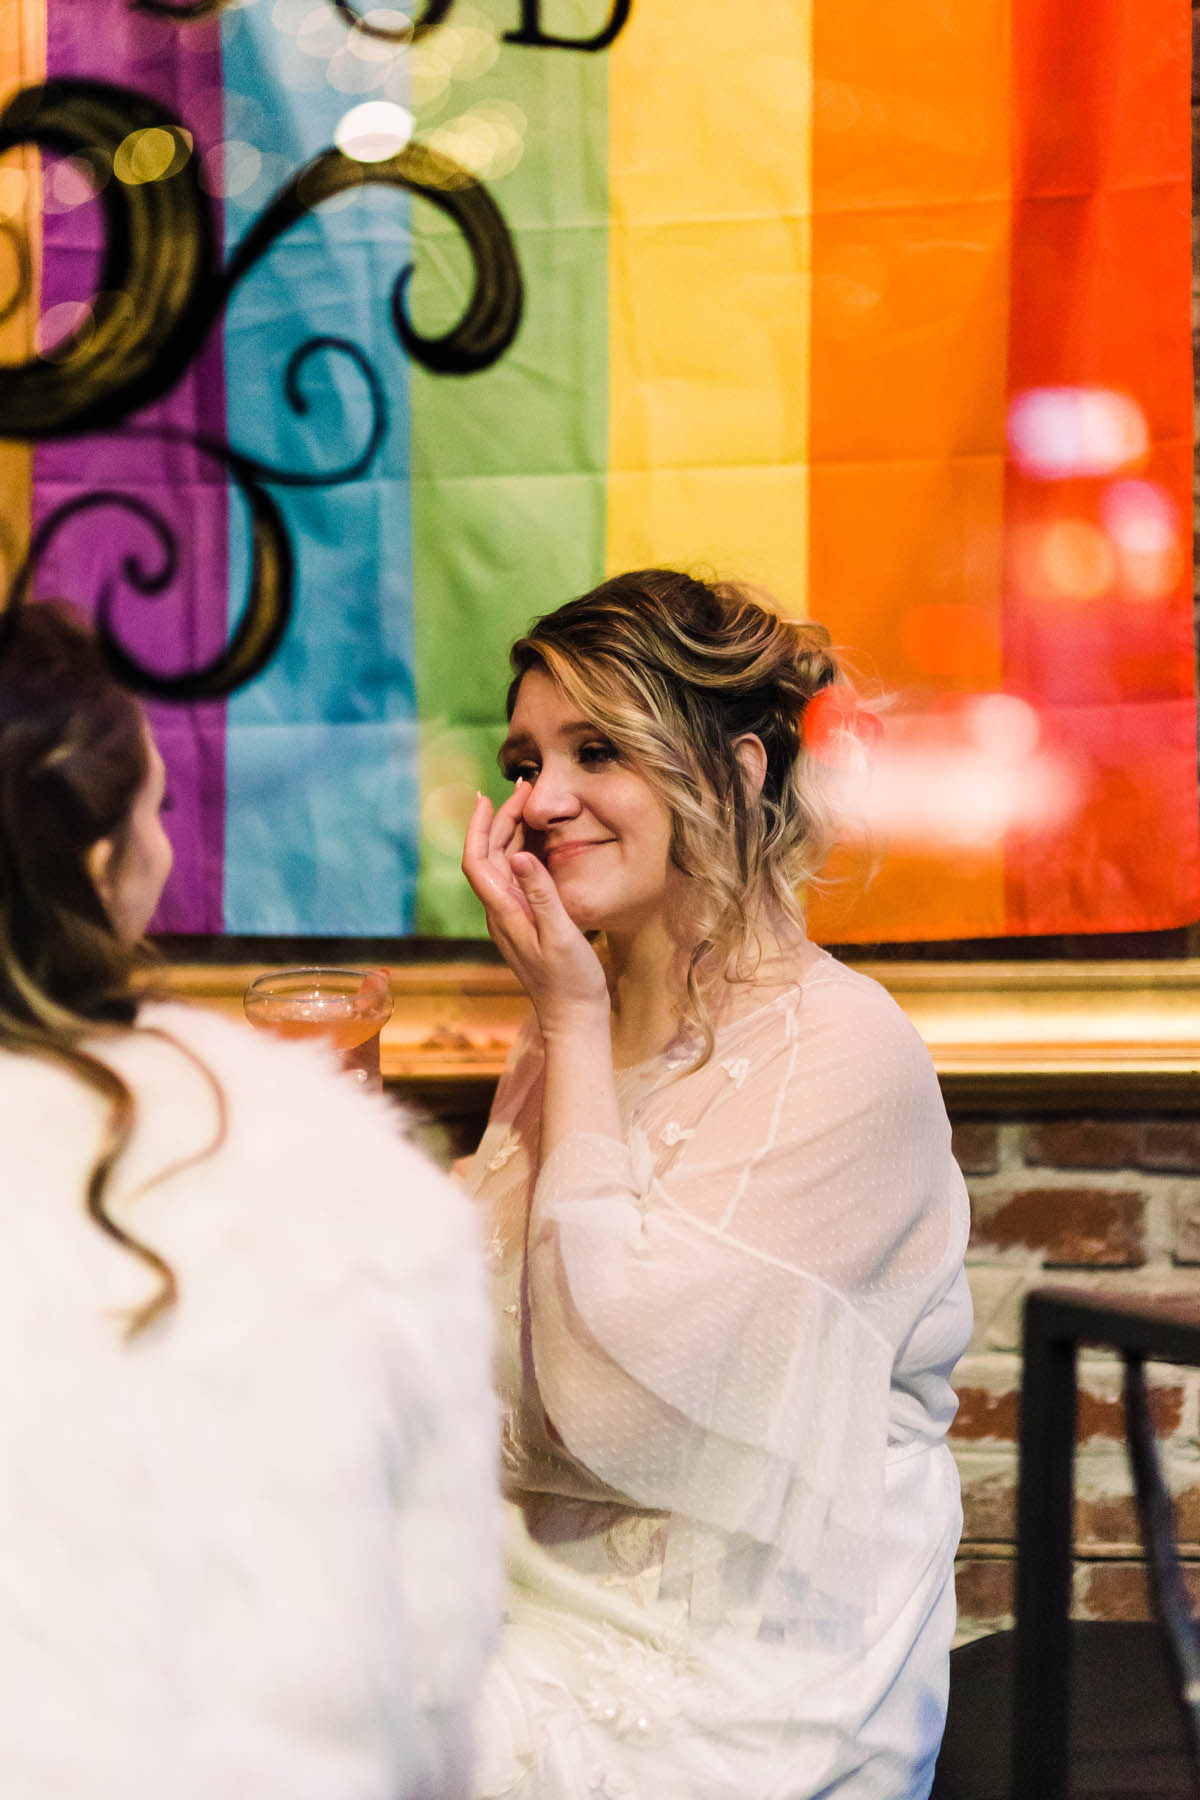 The couple sits at a bar in front of a rainbow Pride flag. One of them is wiping a tear from her eye.